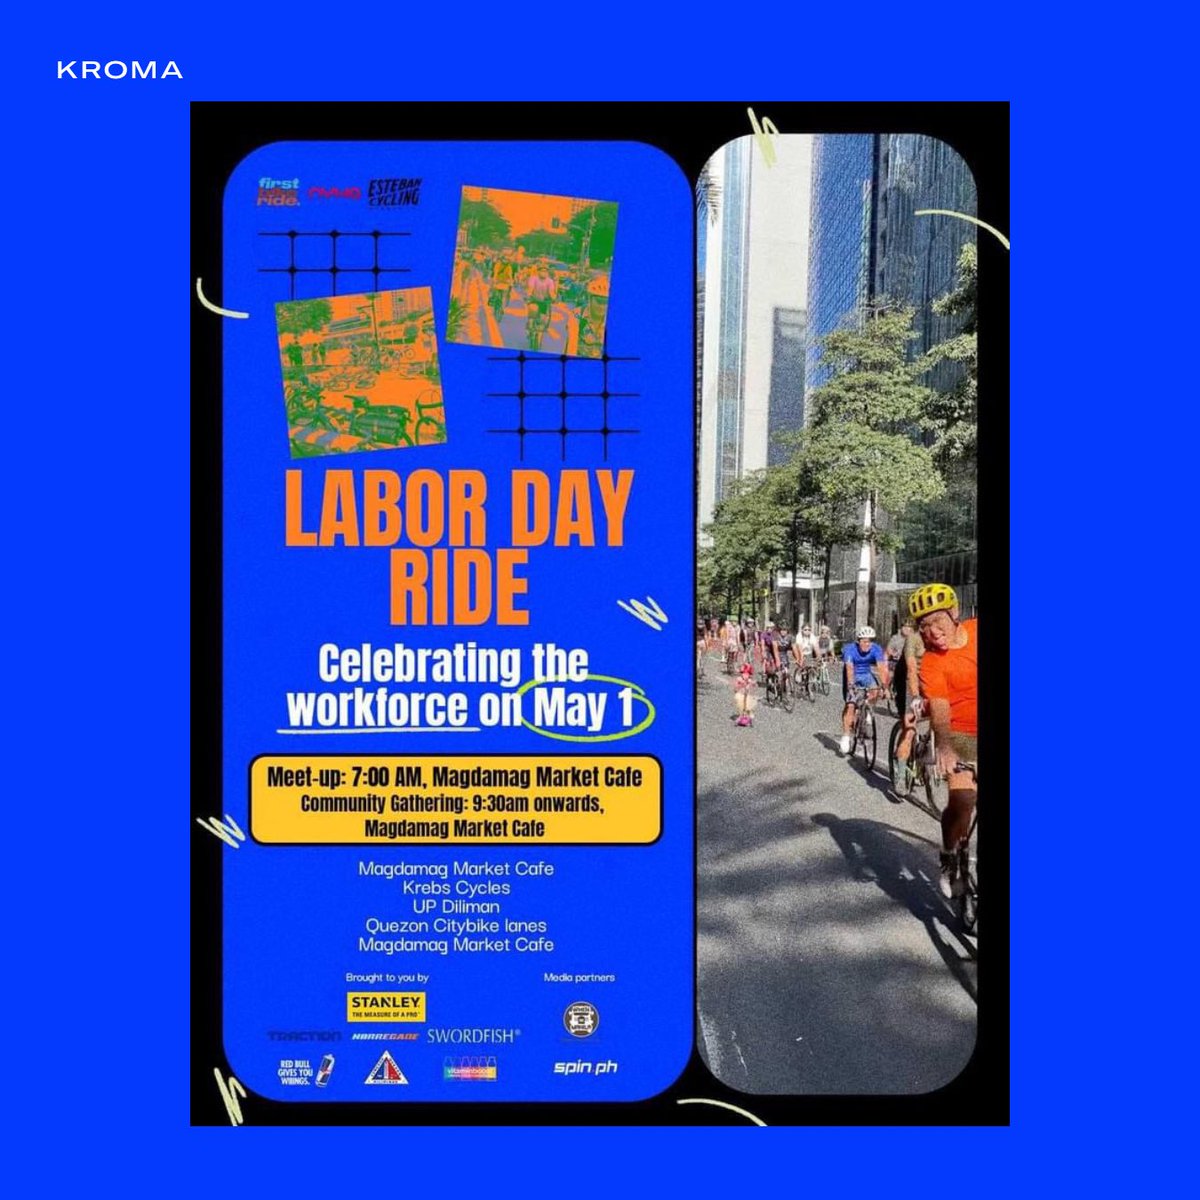 Gear up for a greener Labor Day! 🚴 Join First Bike Ride founder Buji Babiera this May 1st for a special ride celebrating our hardworking workforce, especially those who take the eco-friendly route by biking to work. Embrace a chill-paced journey through the bike-friendly